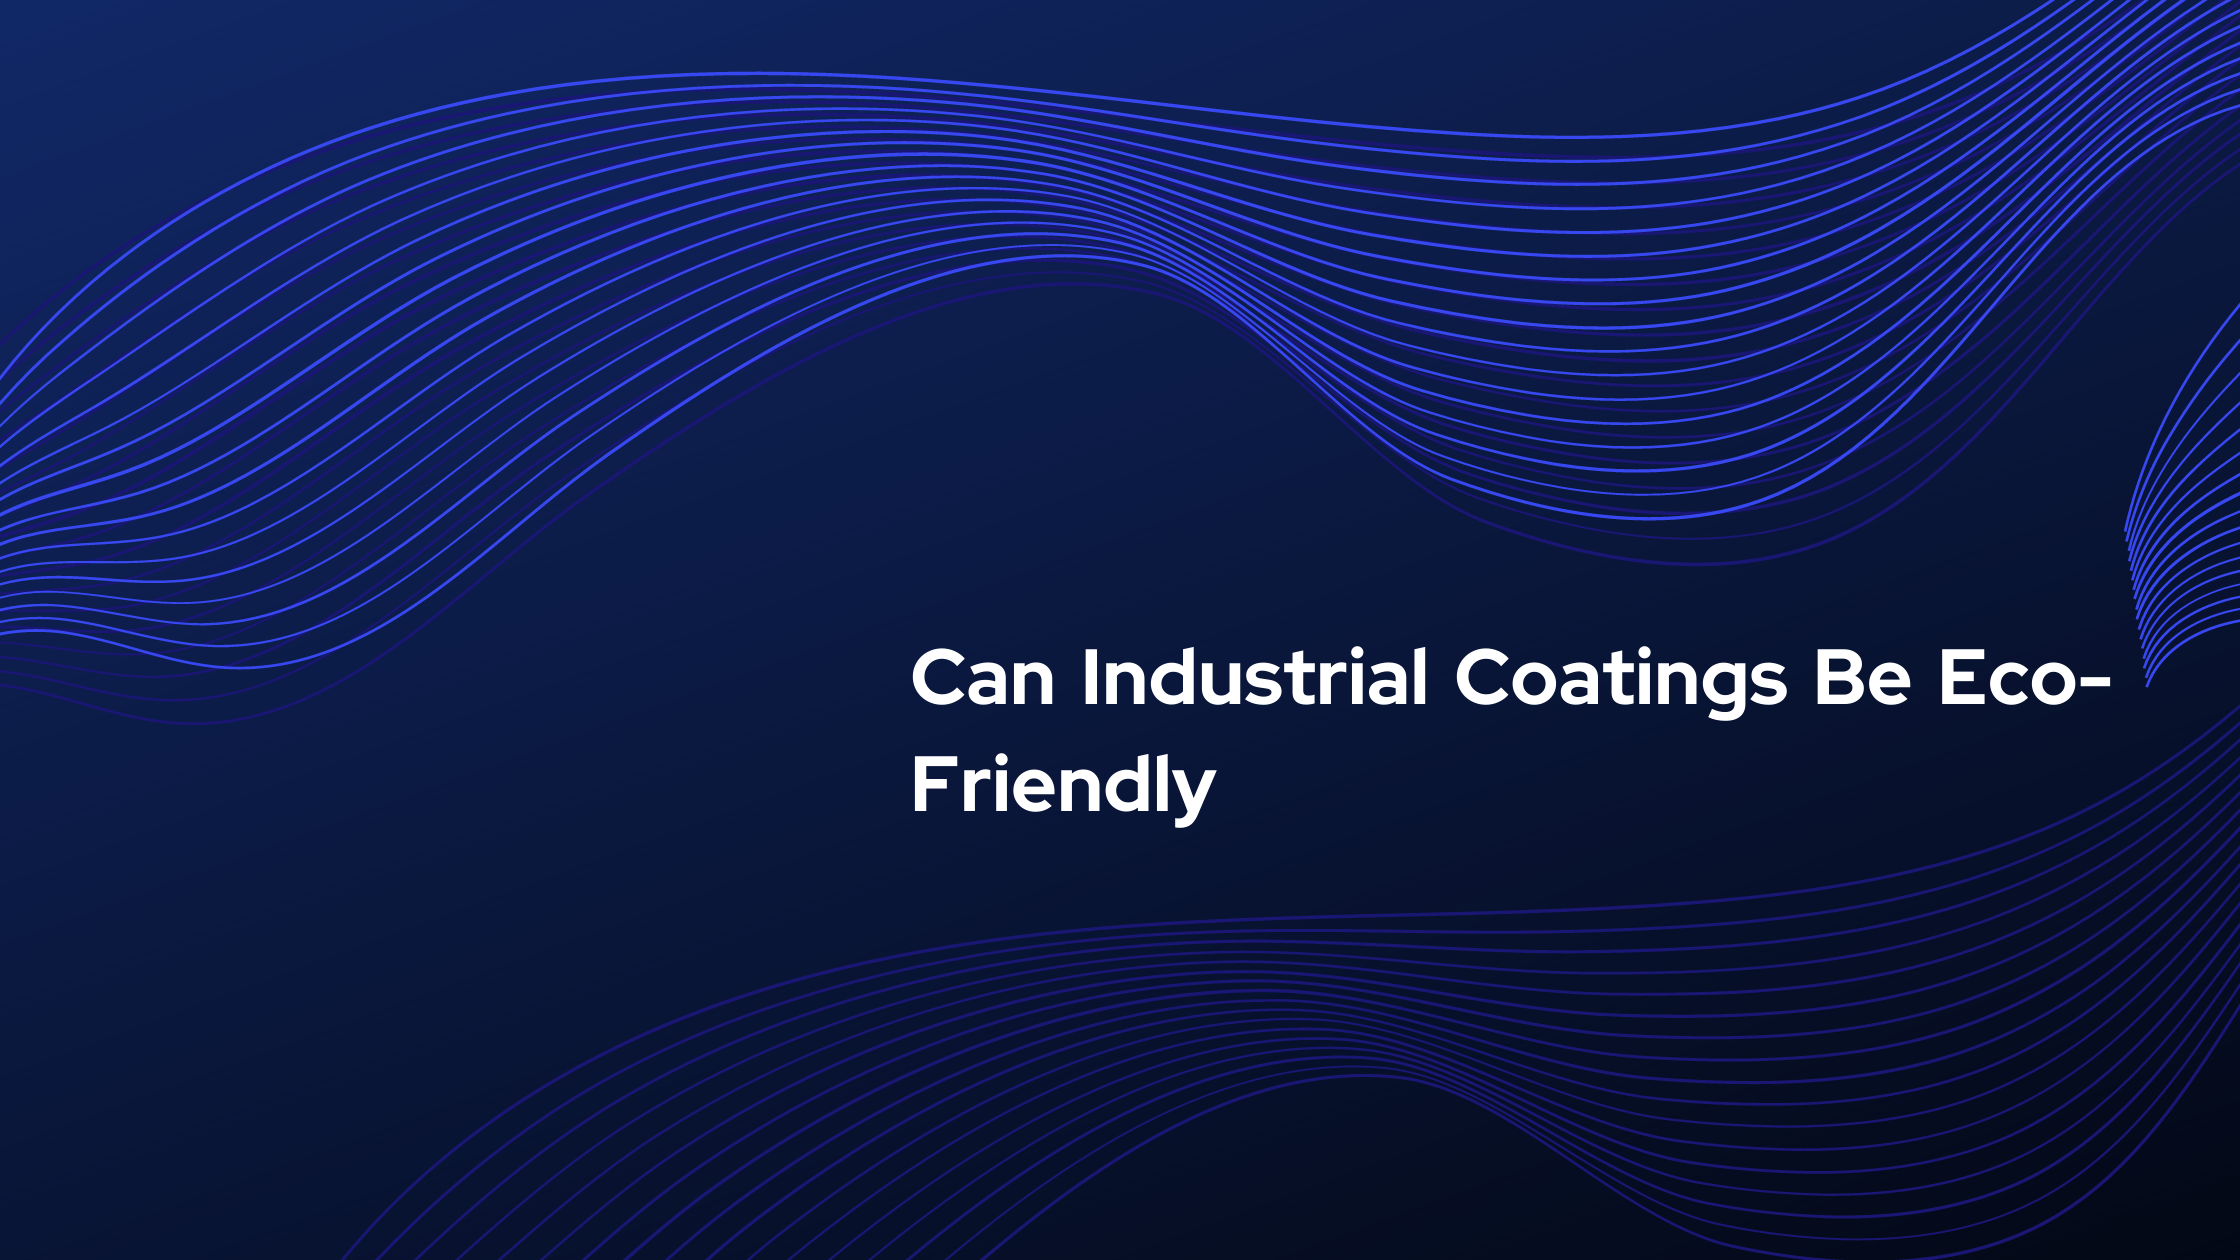 Can Industrial Coatings Be Eco-Friendly